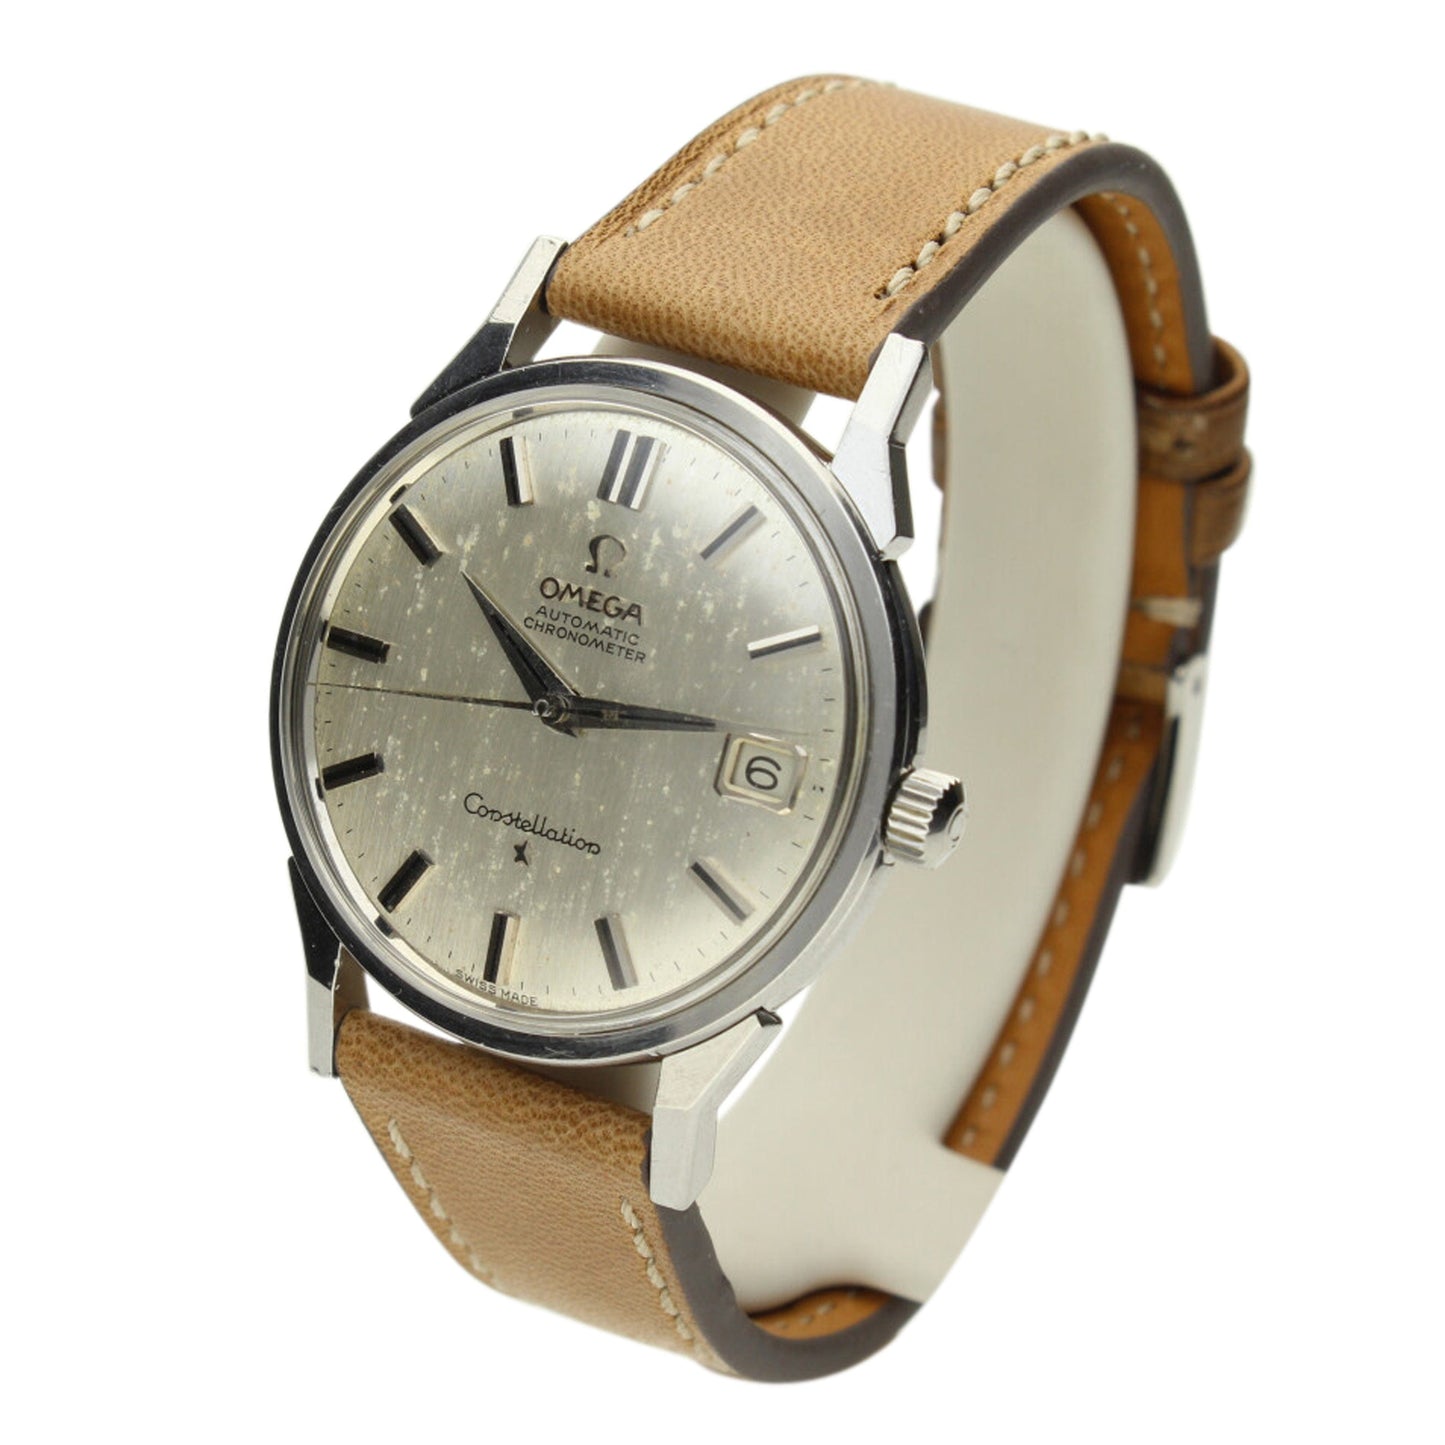 Stainless steel constellation automatic wristwatch. Made 1963